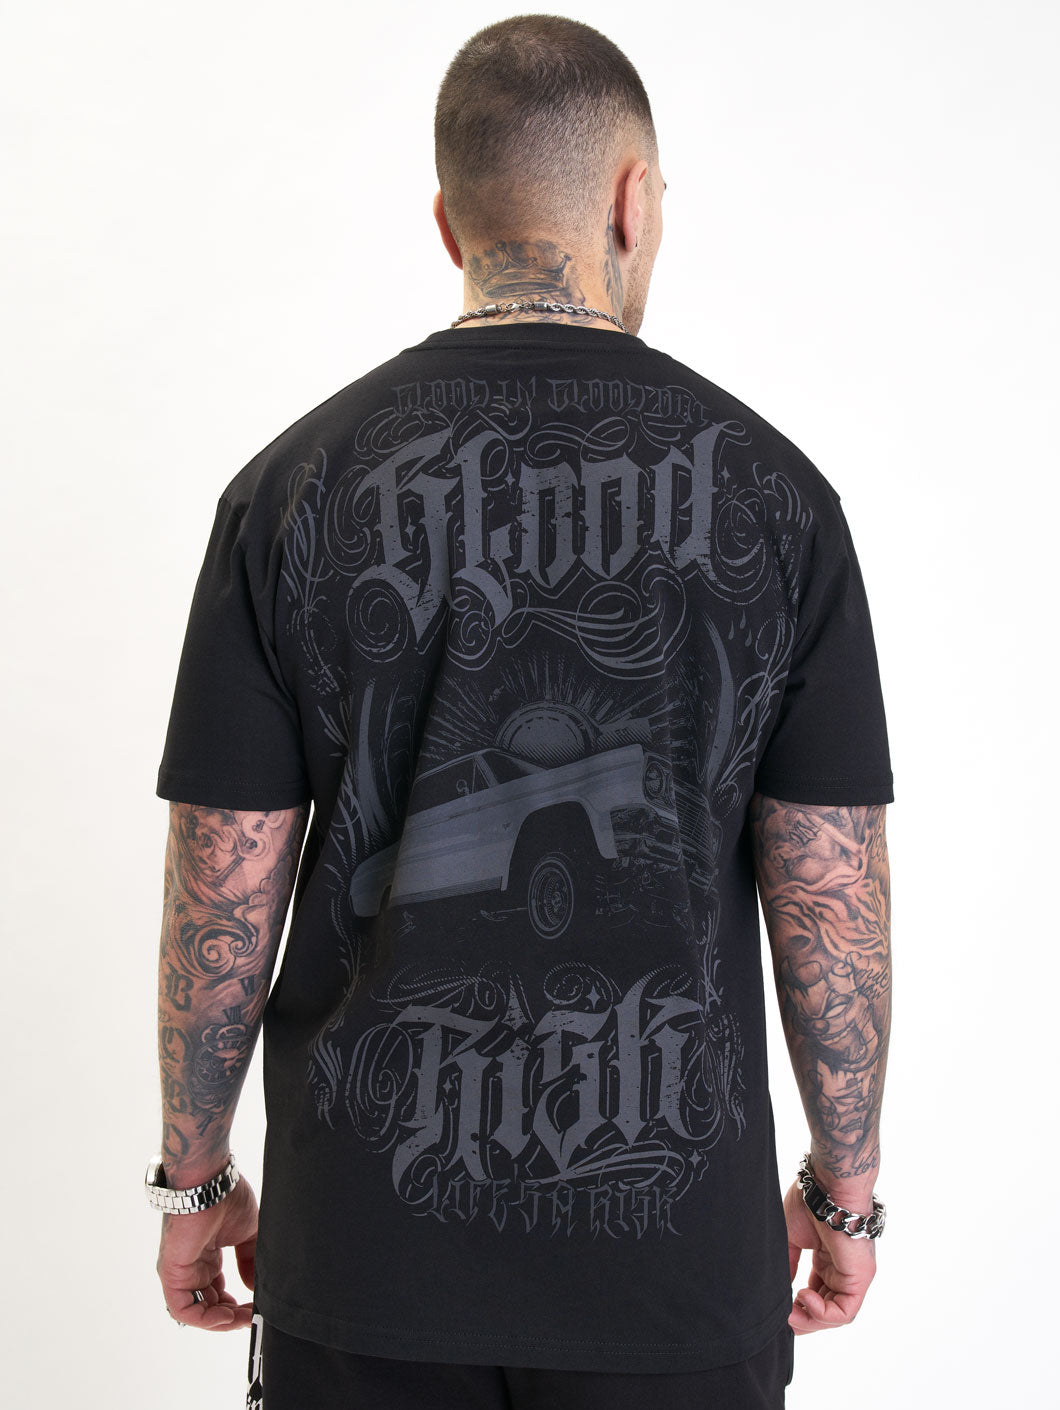 Blood In Blood Out Tavos T-Shirt - 1